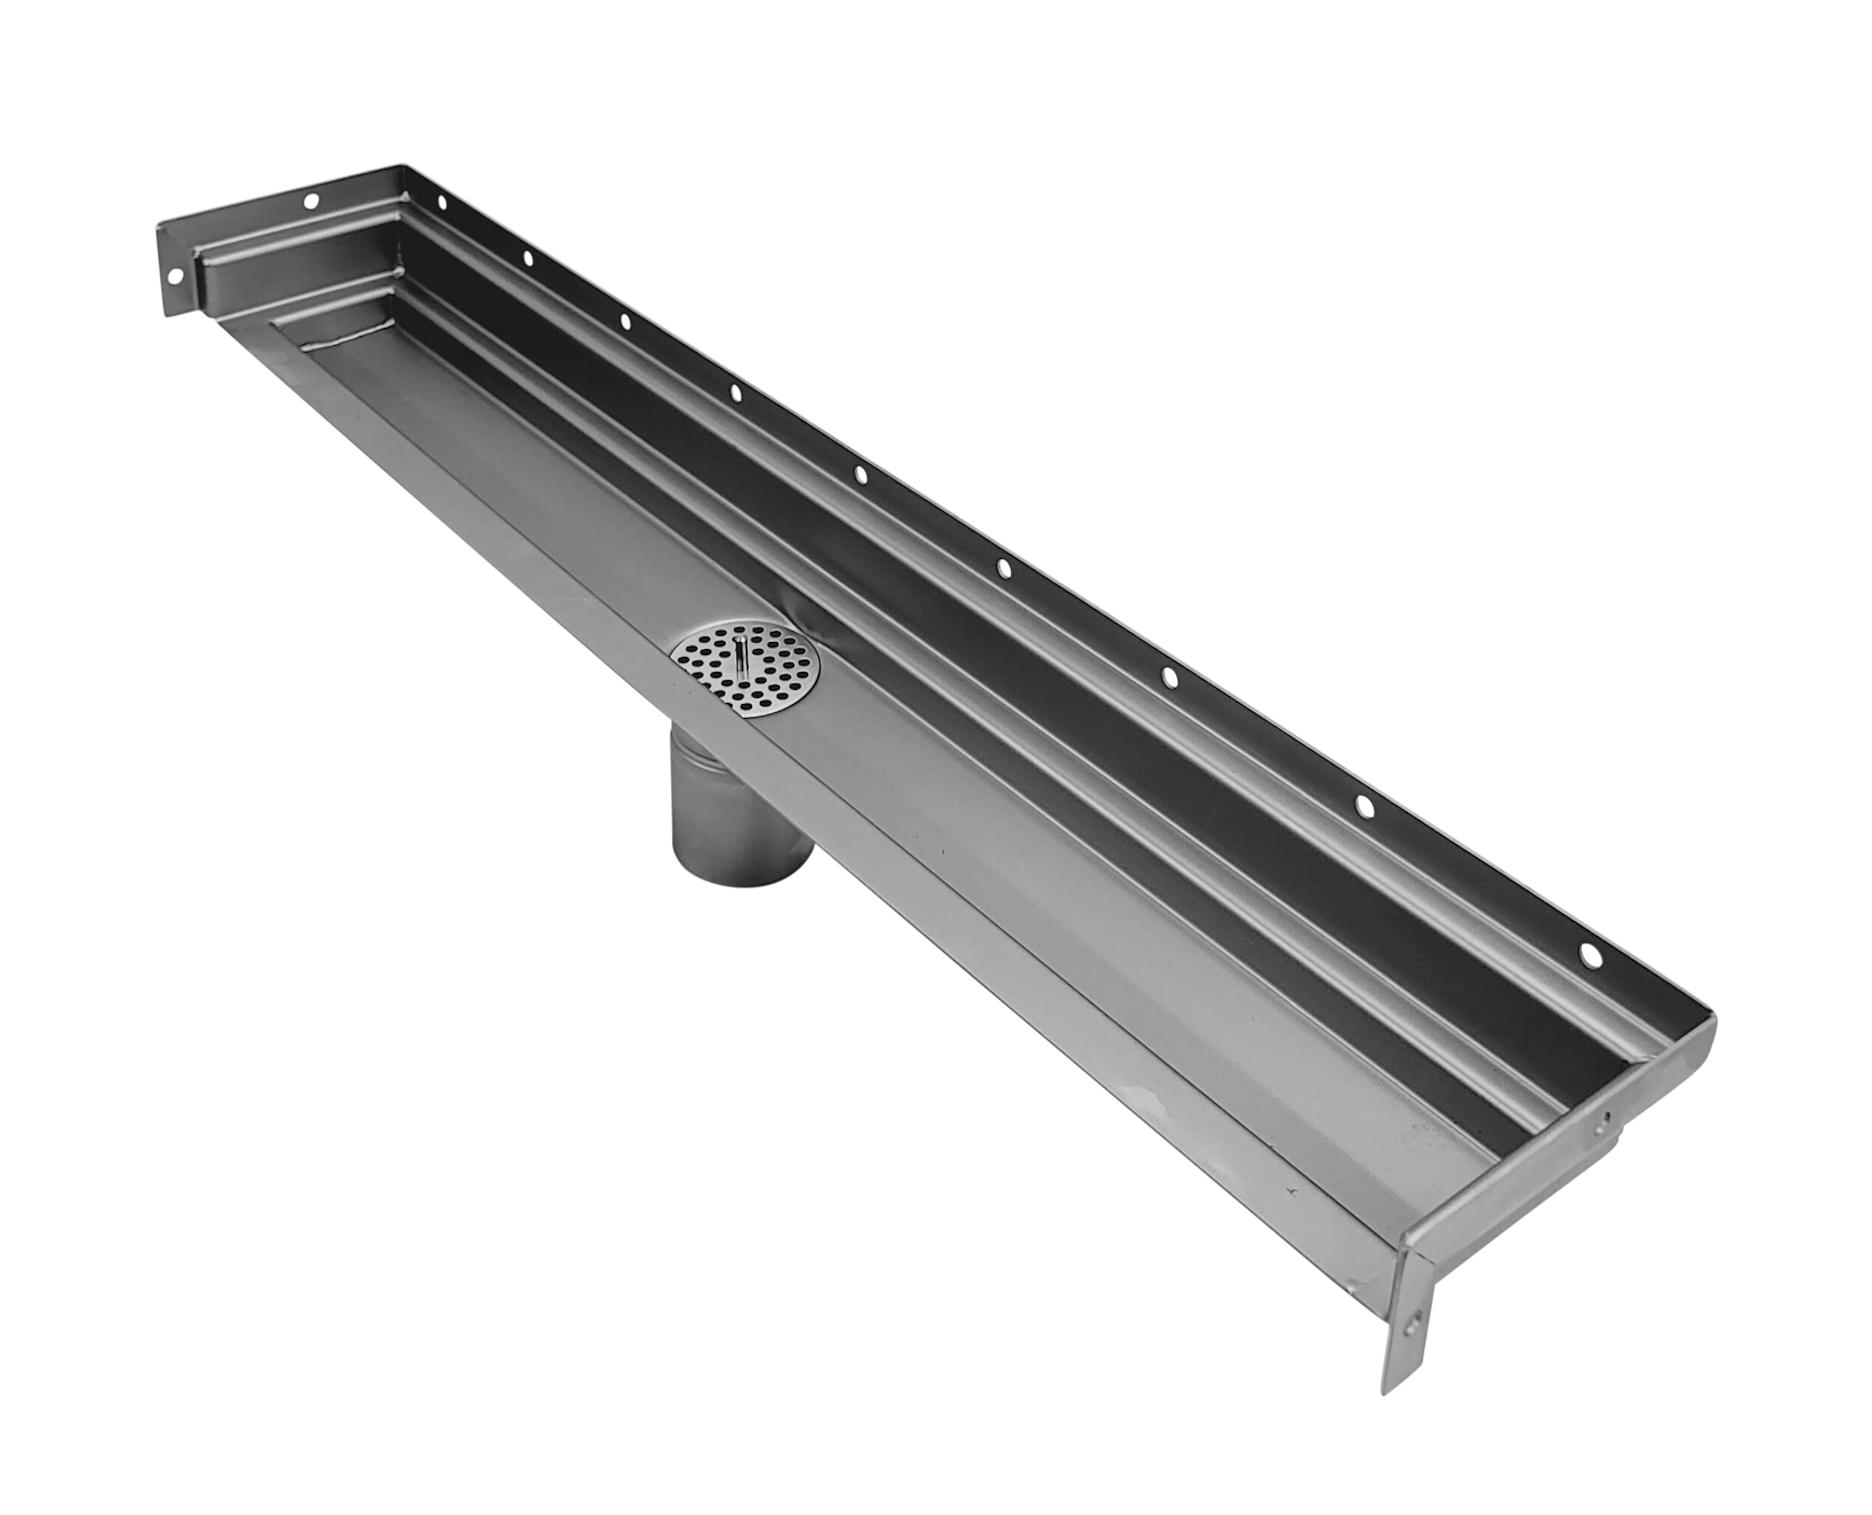 40 Inch Tile-in Wall Mounted Linear Floor Drain, Three Side Return Flange, Drains Unlimited